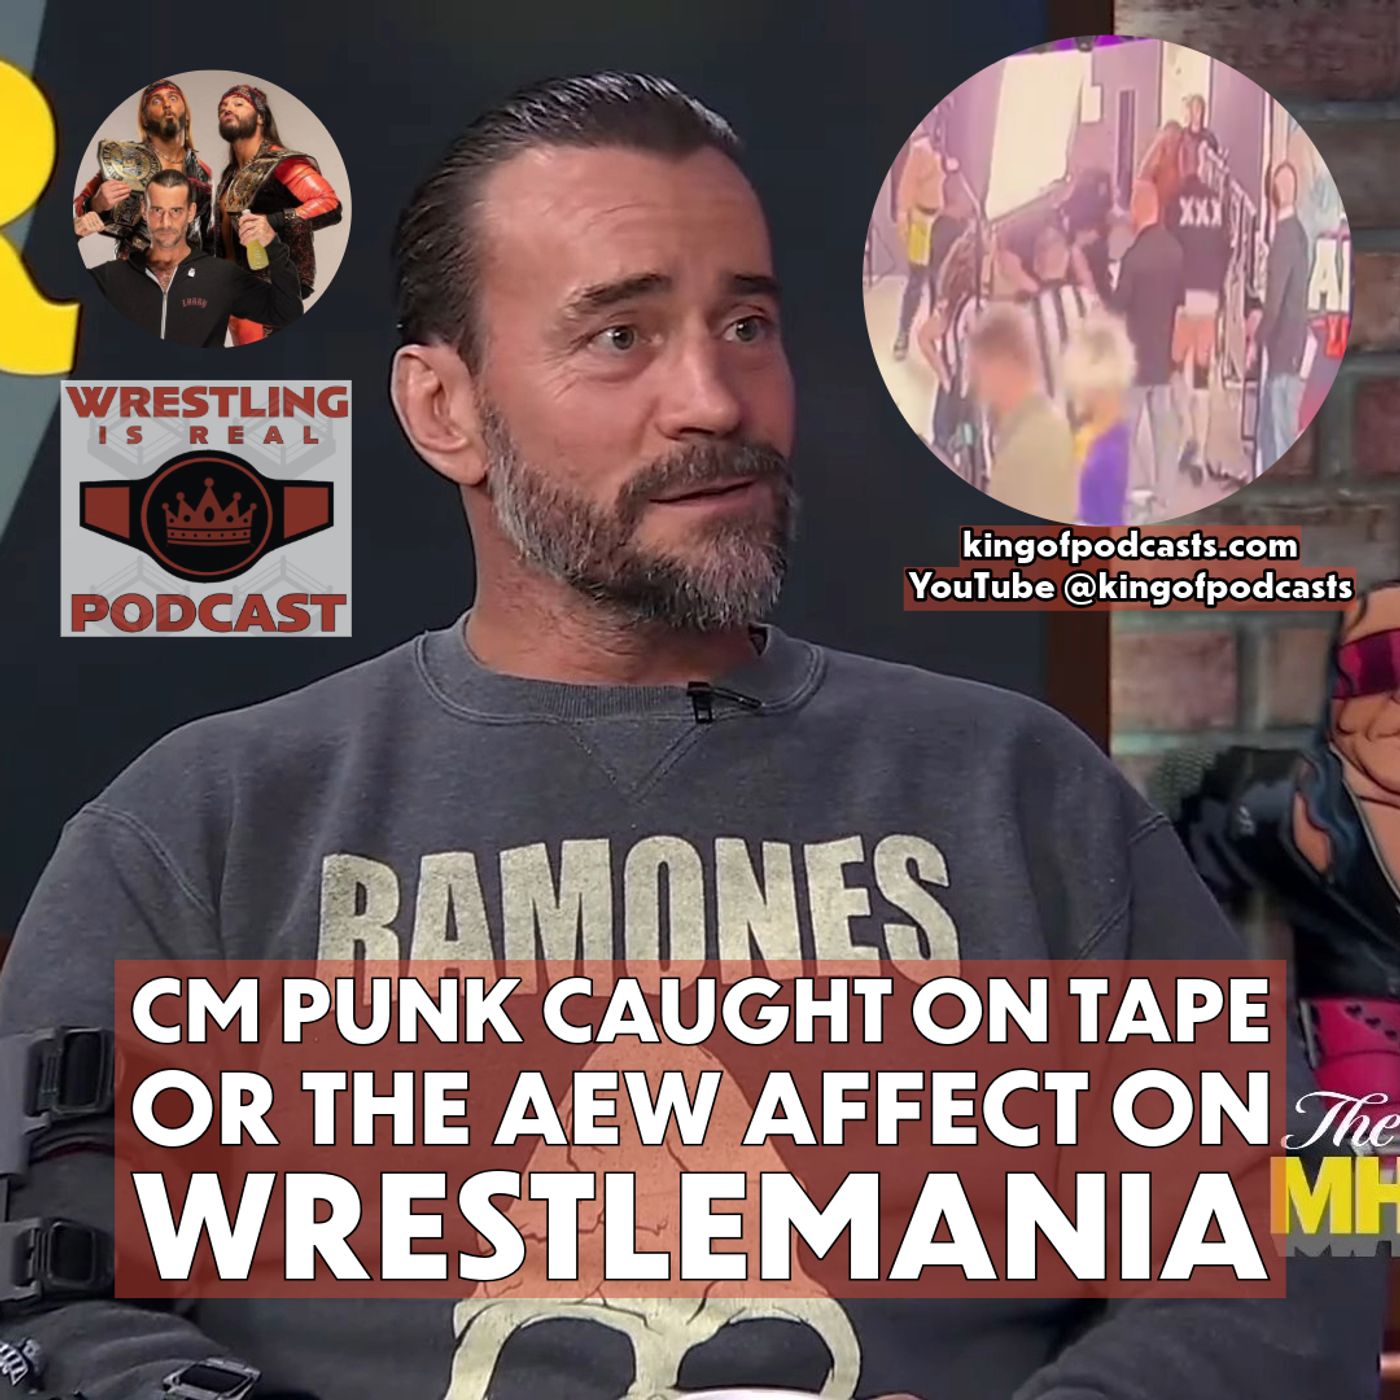 CM Punk Caught on Tape or the AEW Affect on WrestleMania (ep.840)